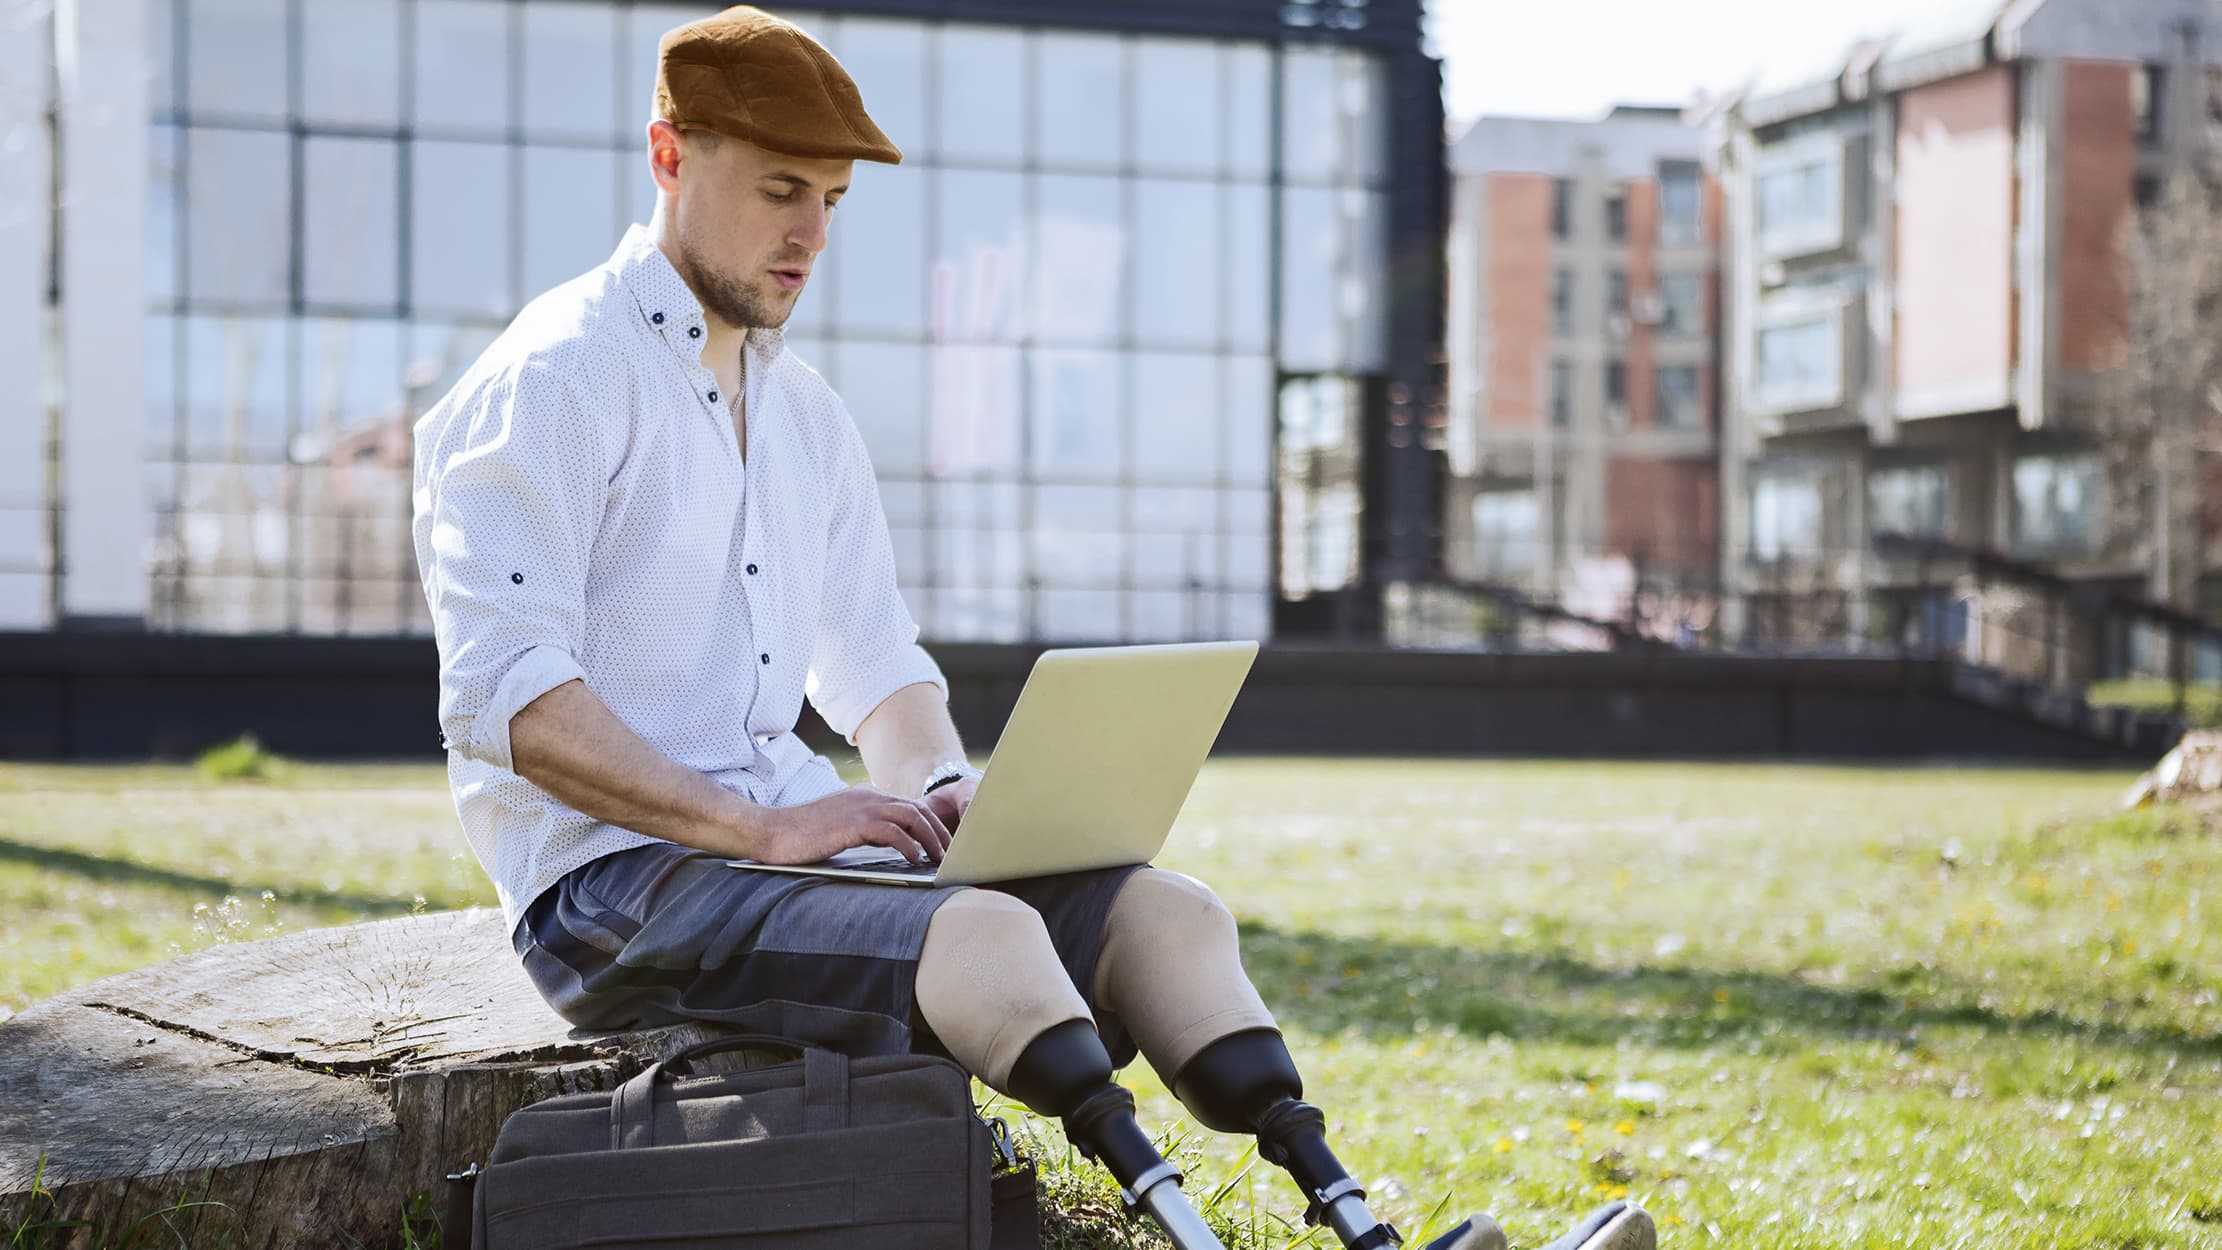 Man with artificial legs working on laptop outdoor